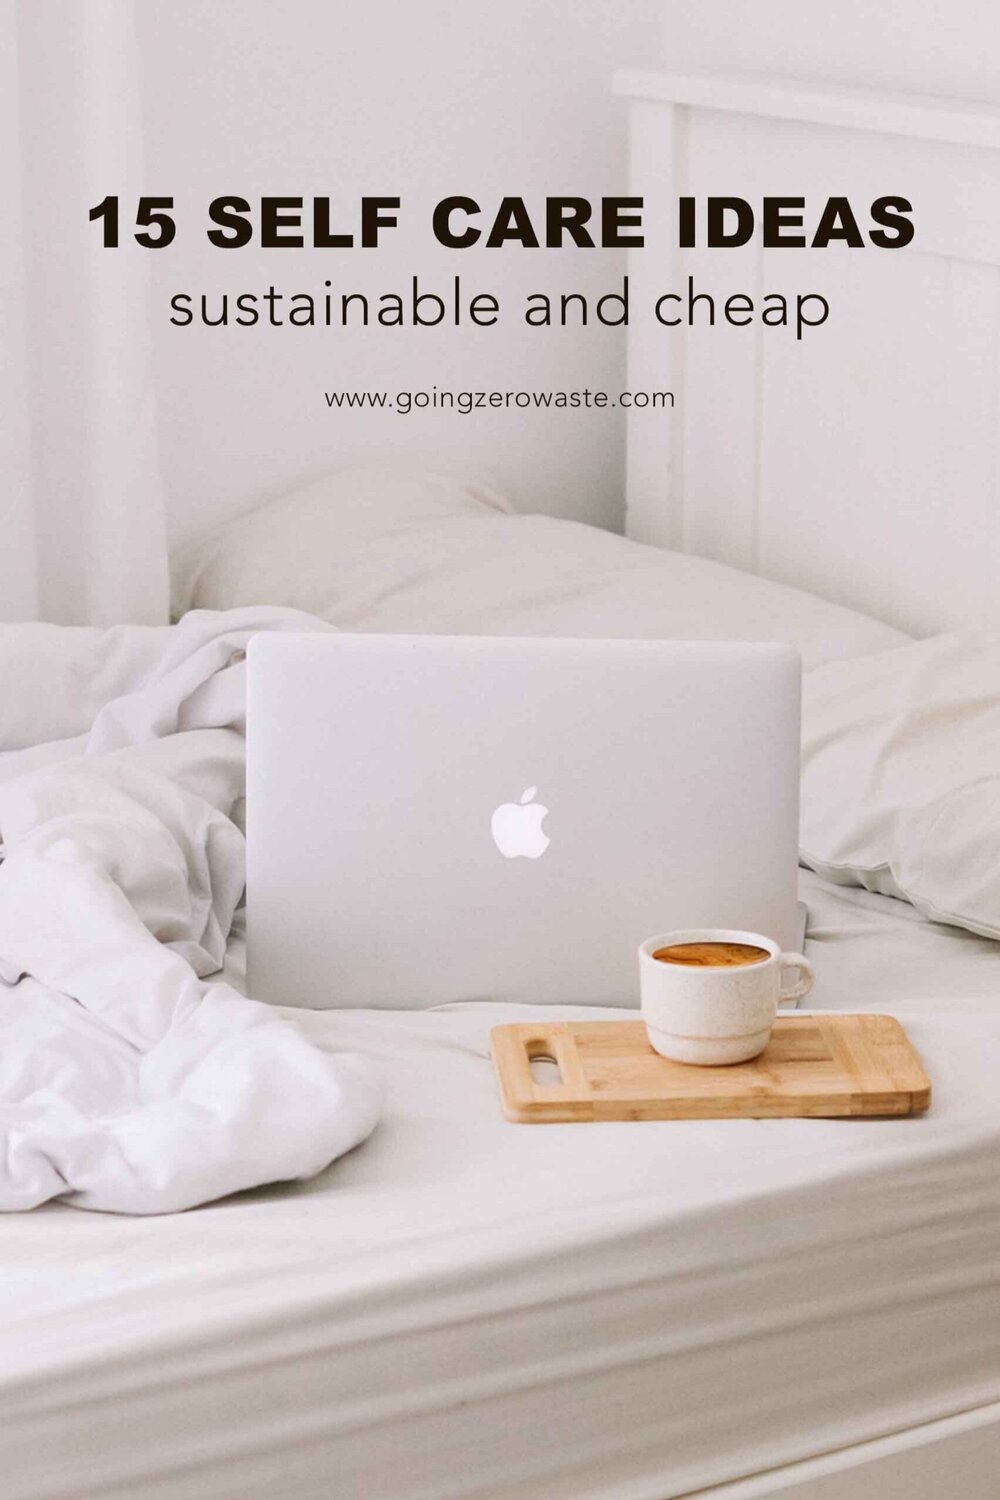 Sustainable, ethical and cheap 15 self care ideas from www.goingzerowaste.com #selfcare #sustainable #cheap #free #selfcareideas #wellness #takecareofyourself #pamperyourself #athome #inside